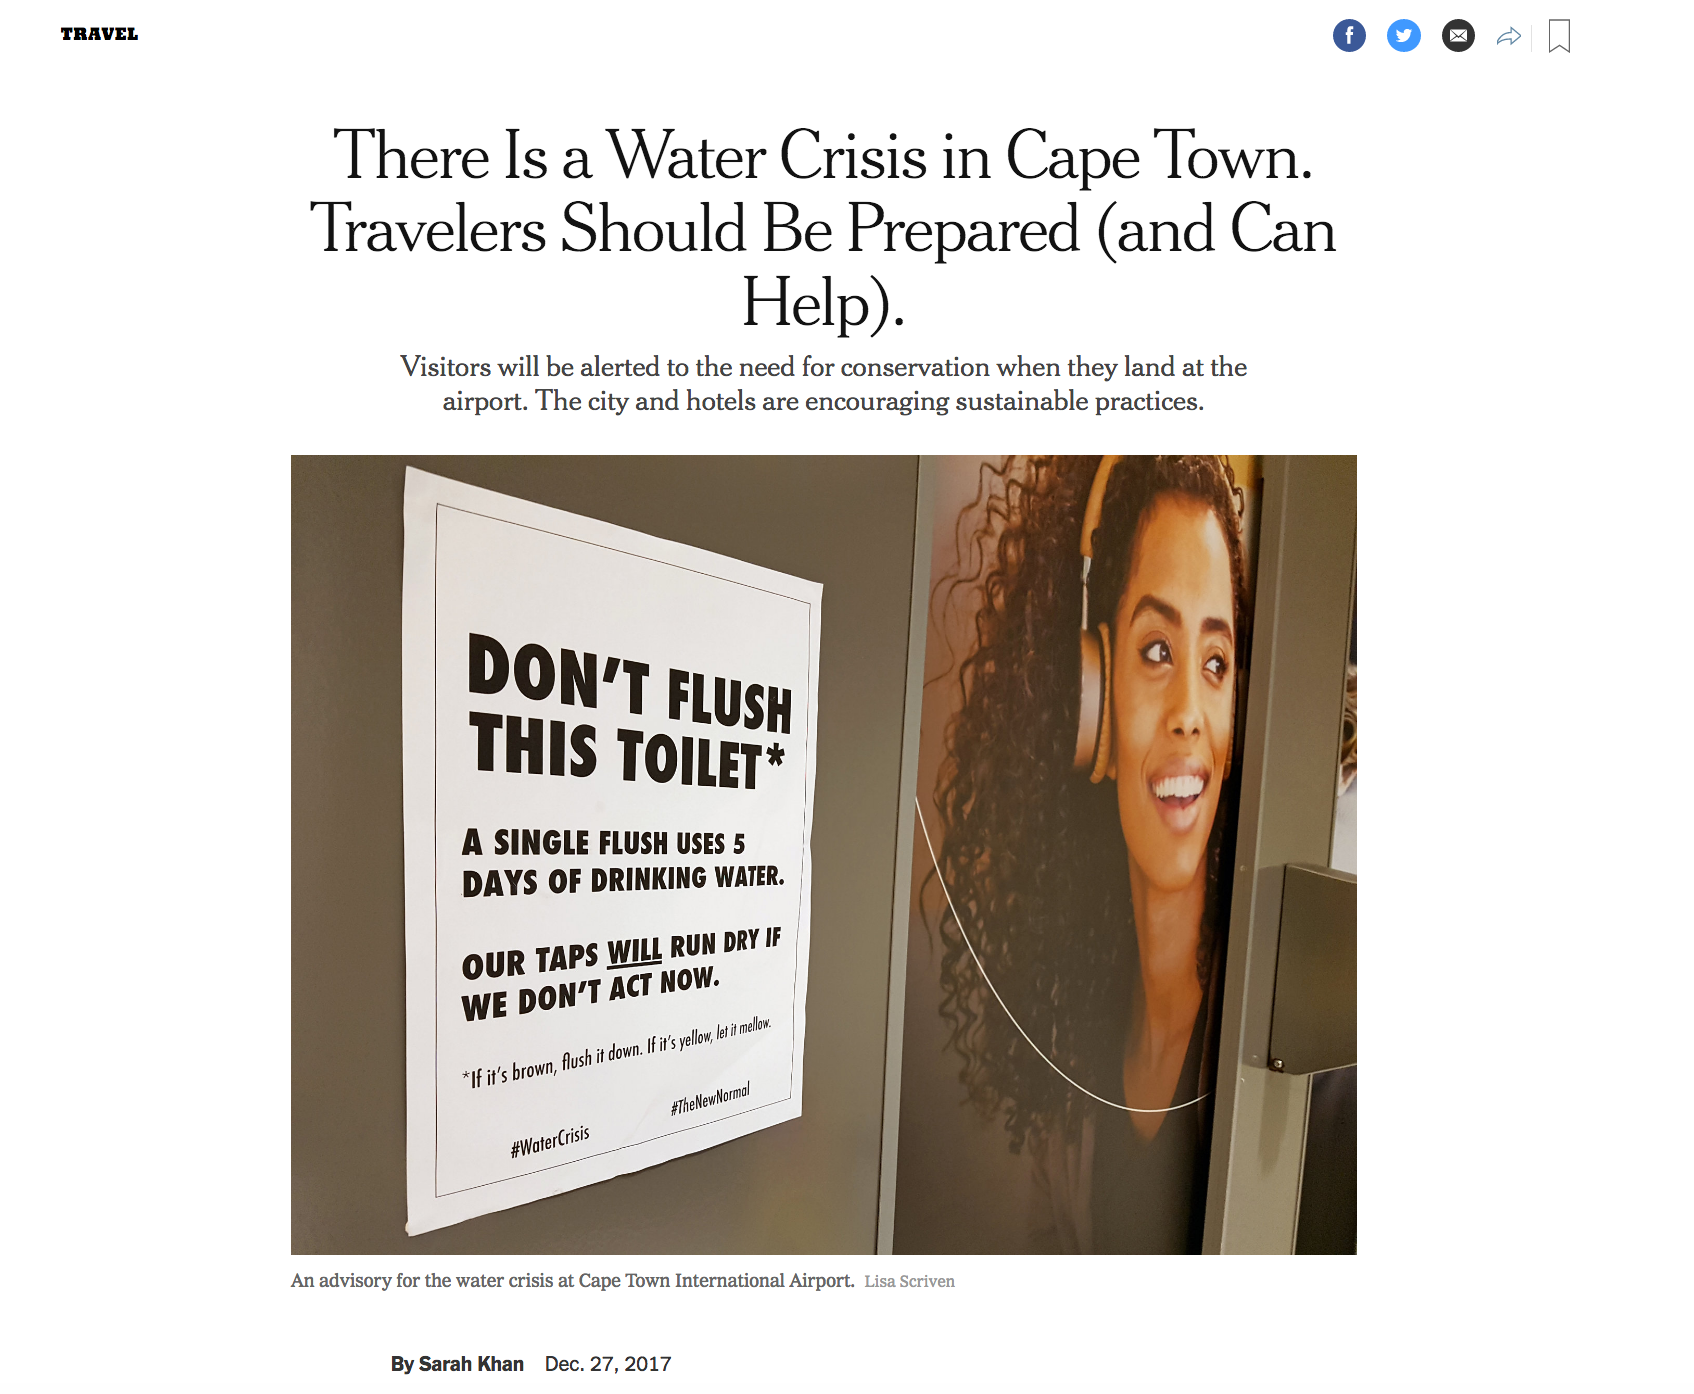 New York Times: There Is a Water Crisis in Cape Town